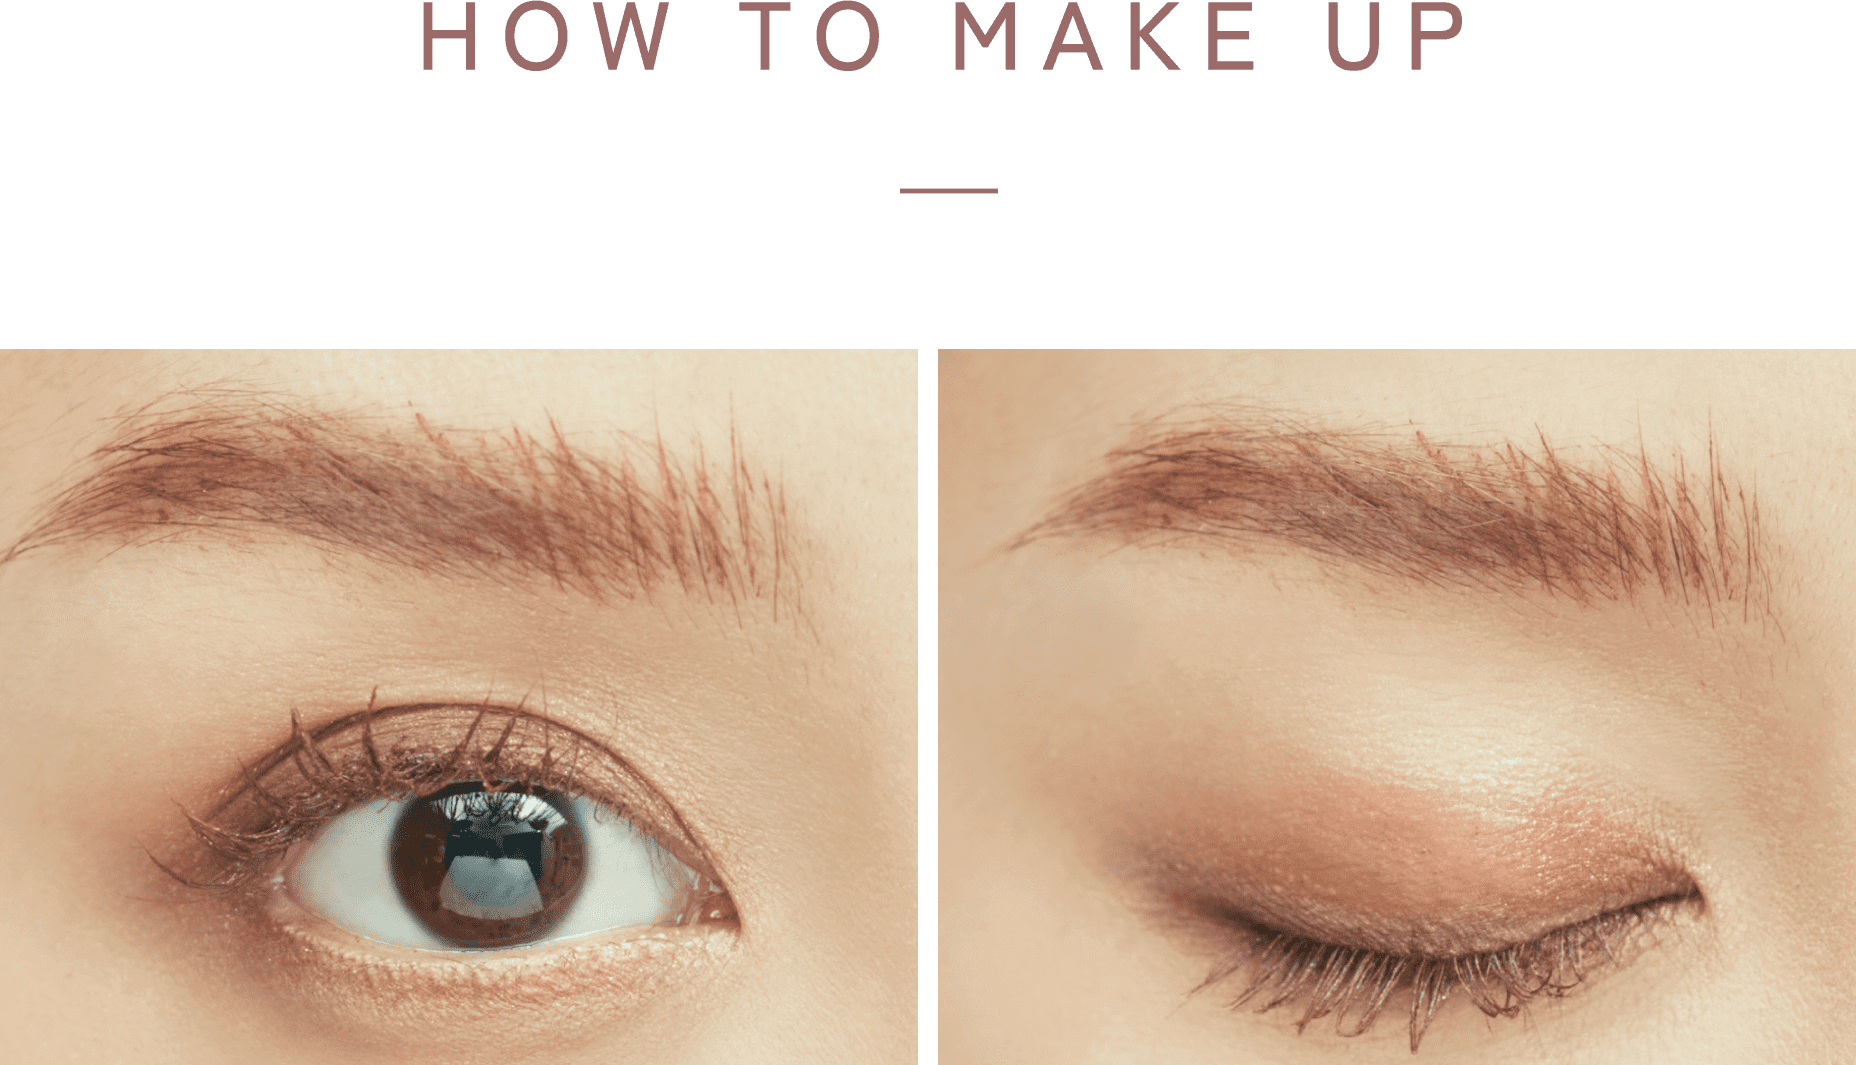 HOW TO MAKE UP